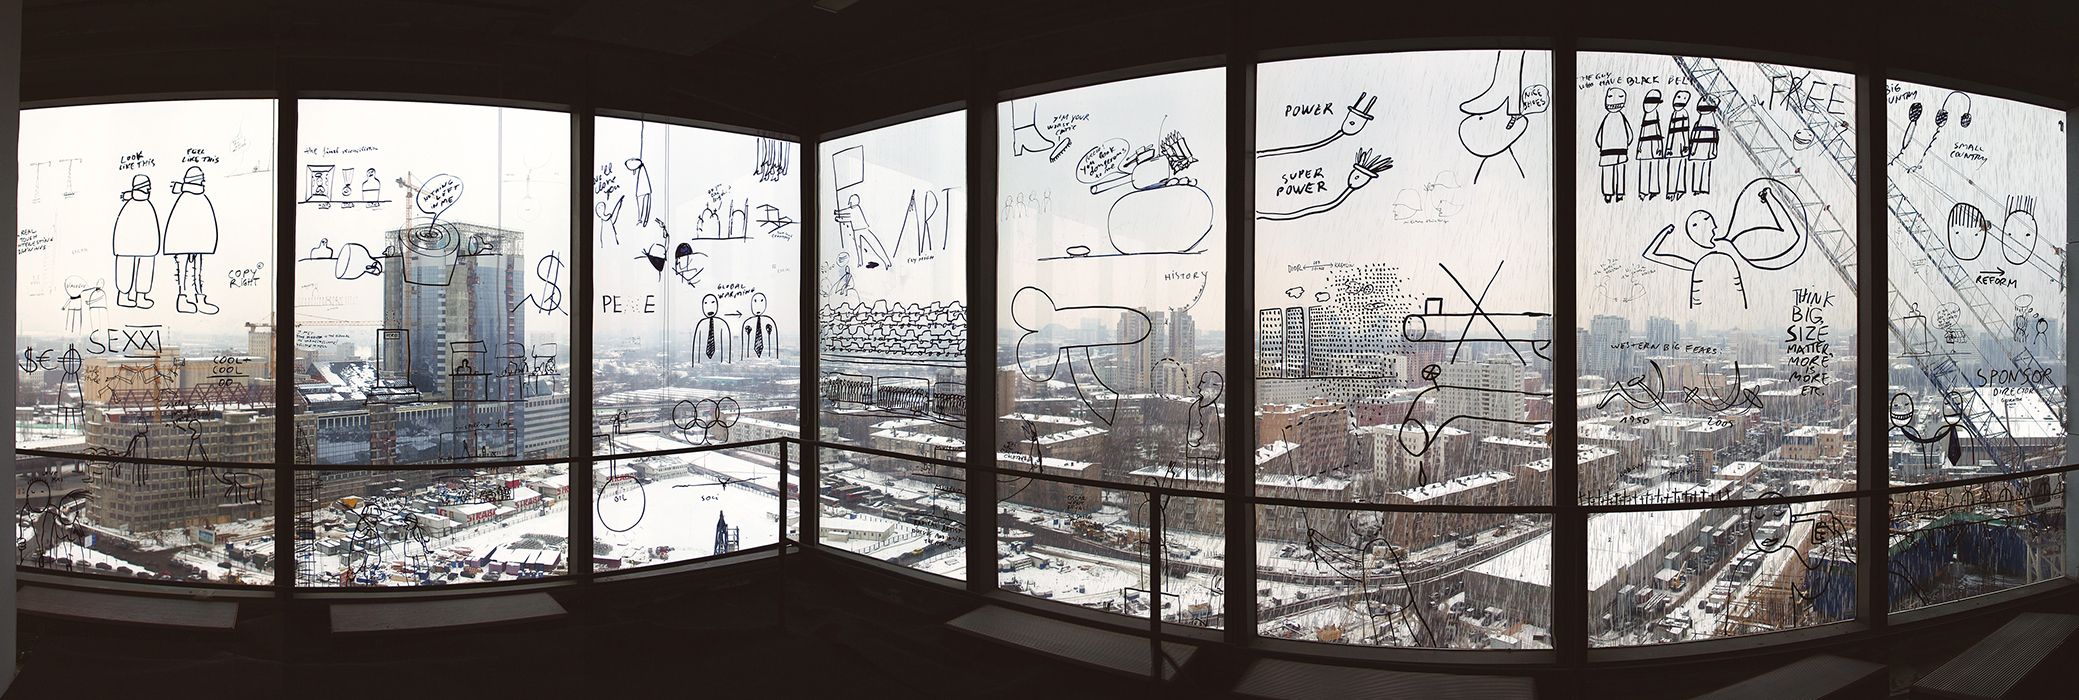 A panoramic photograph of a series of windows in Moscow covered with drawings and text created by artist Dan Perjovschi.